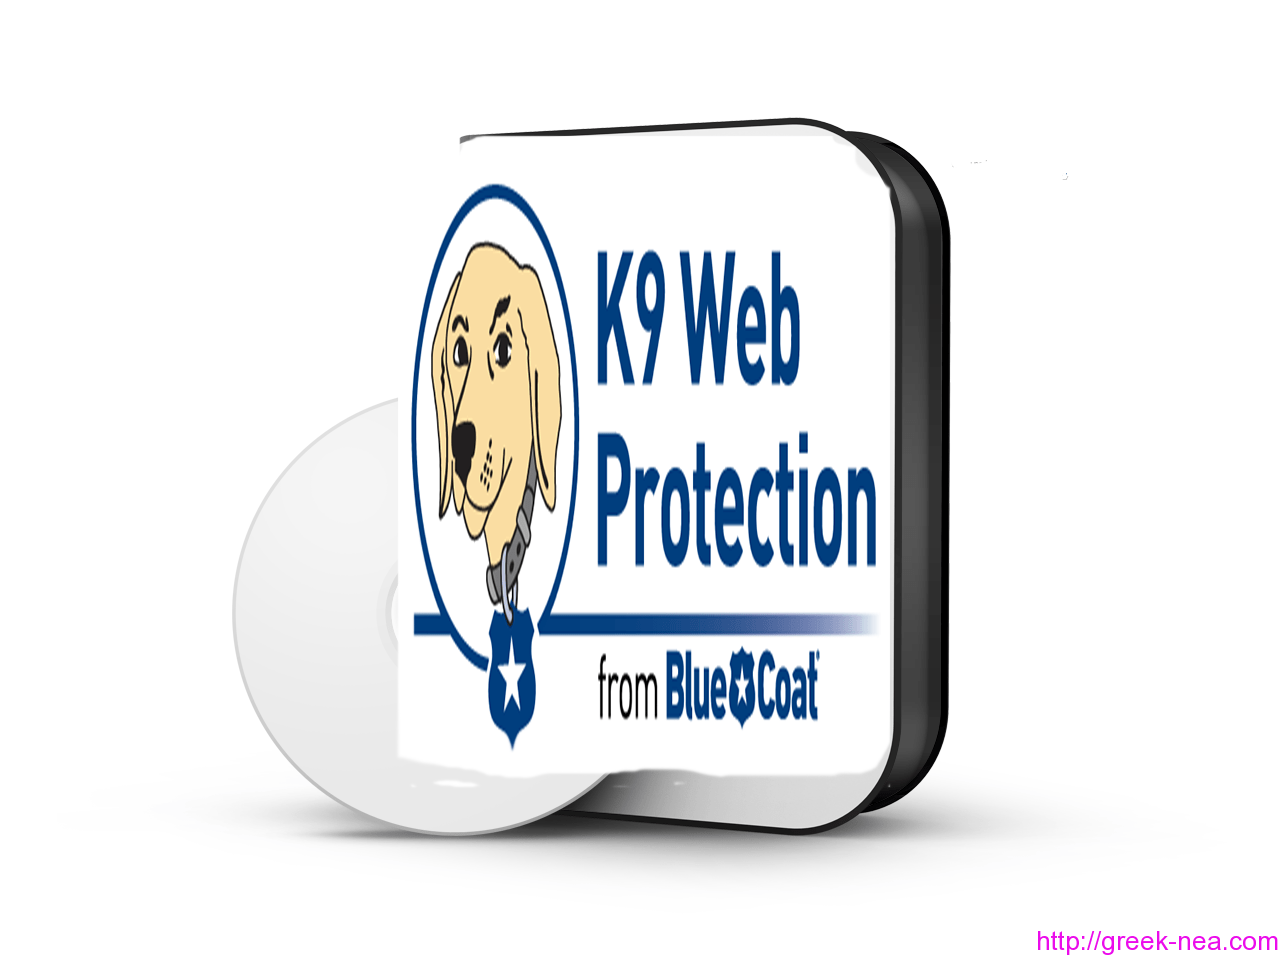 k9 web protection sign in